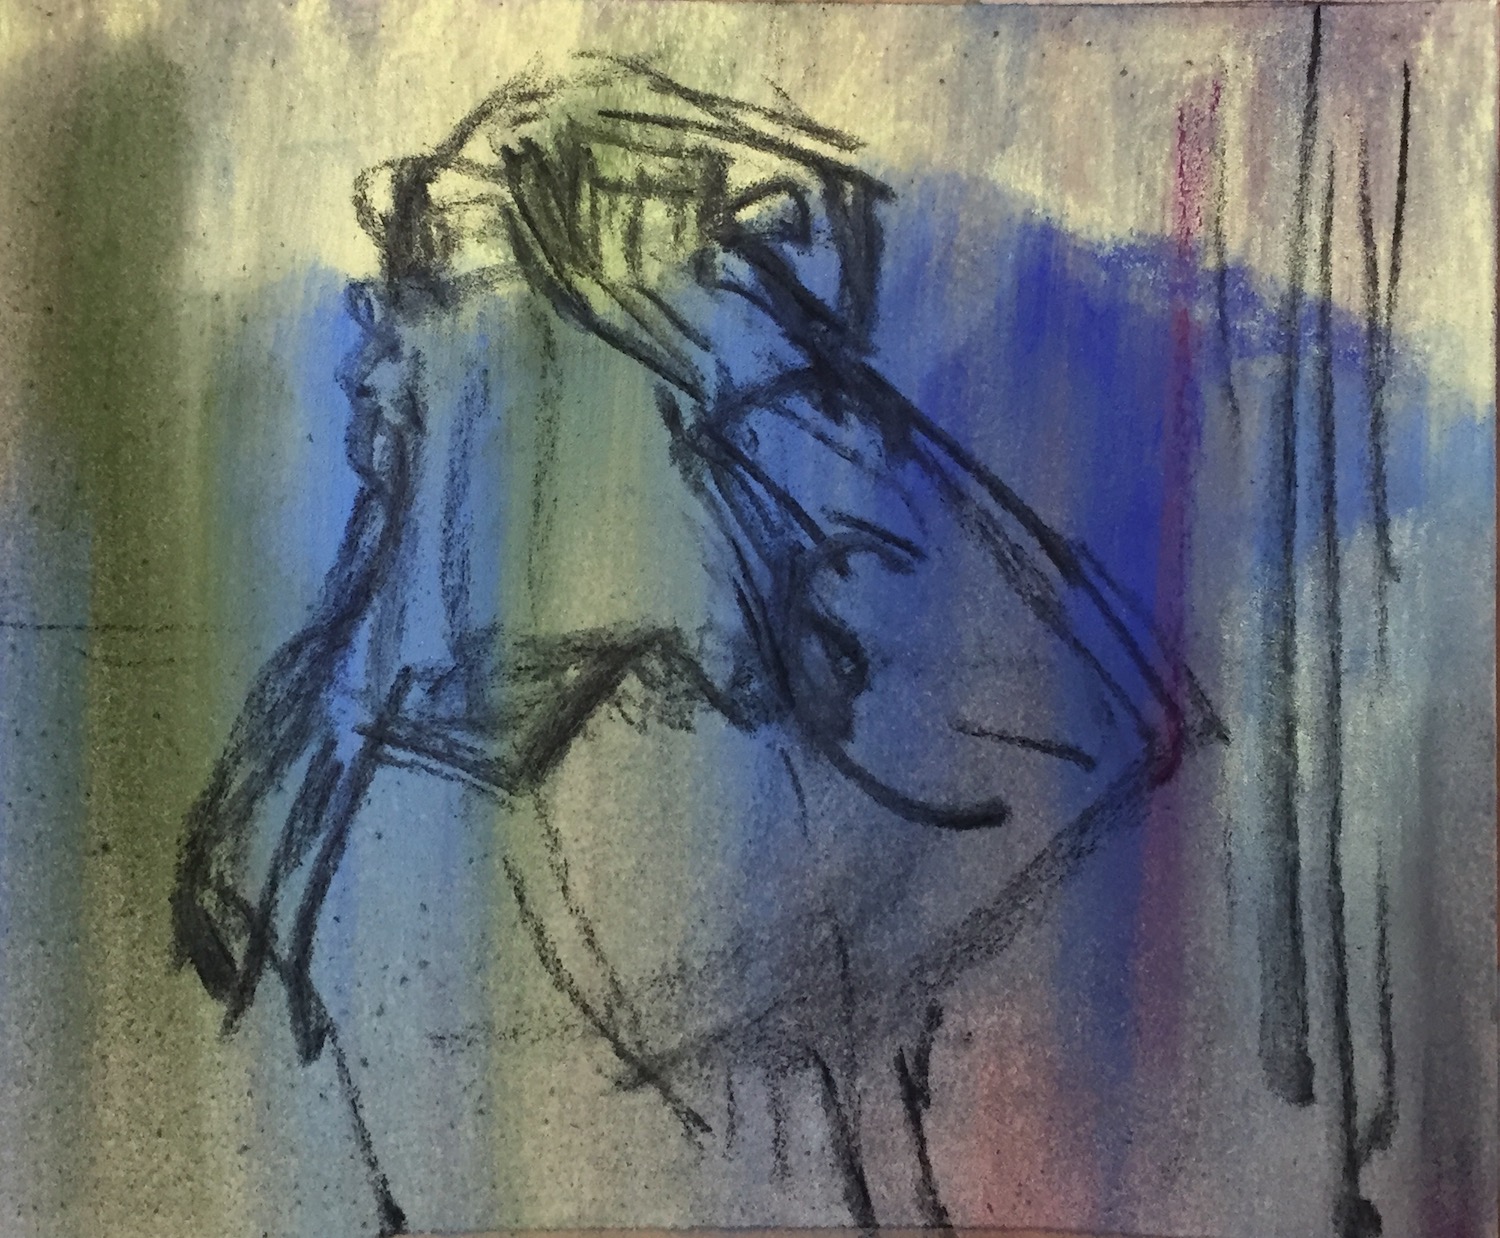 10-minute painting: Drew up the image in vine charcoal. This took almost two minutes of my 10!